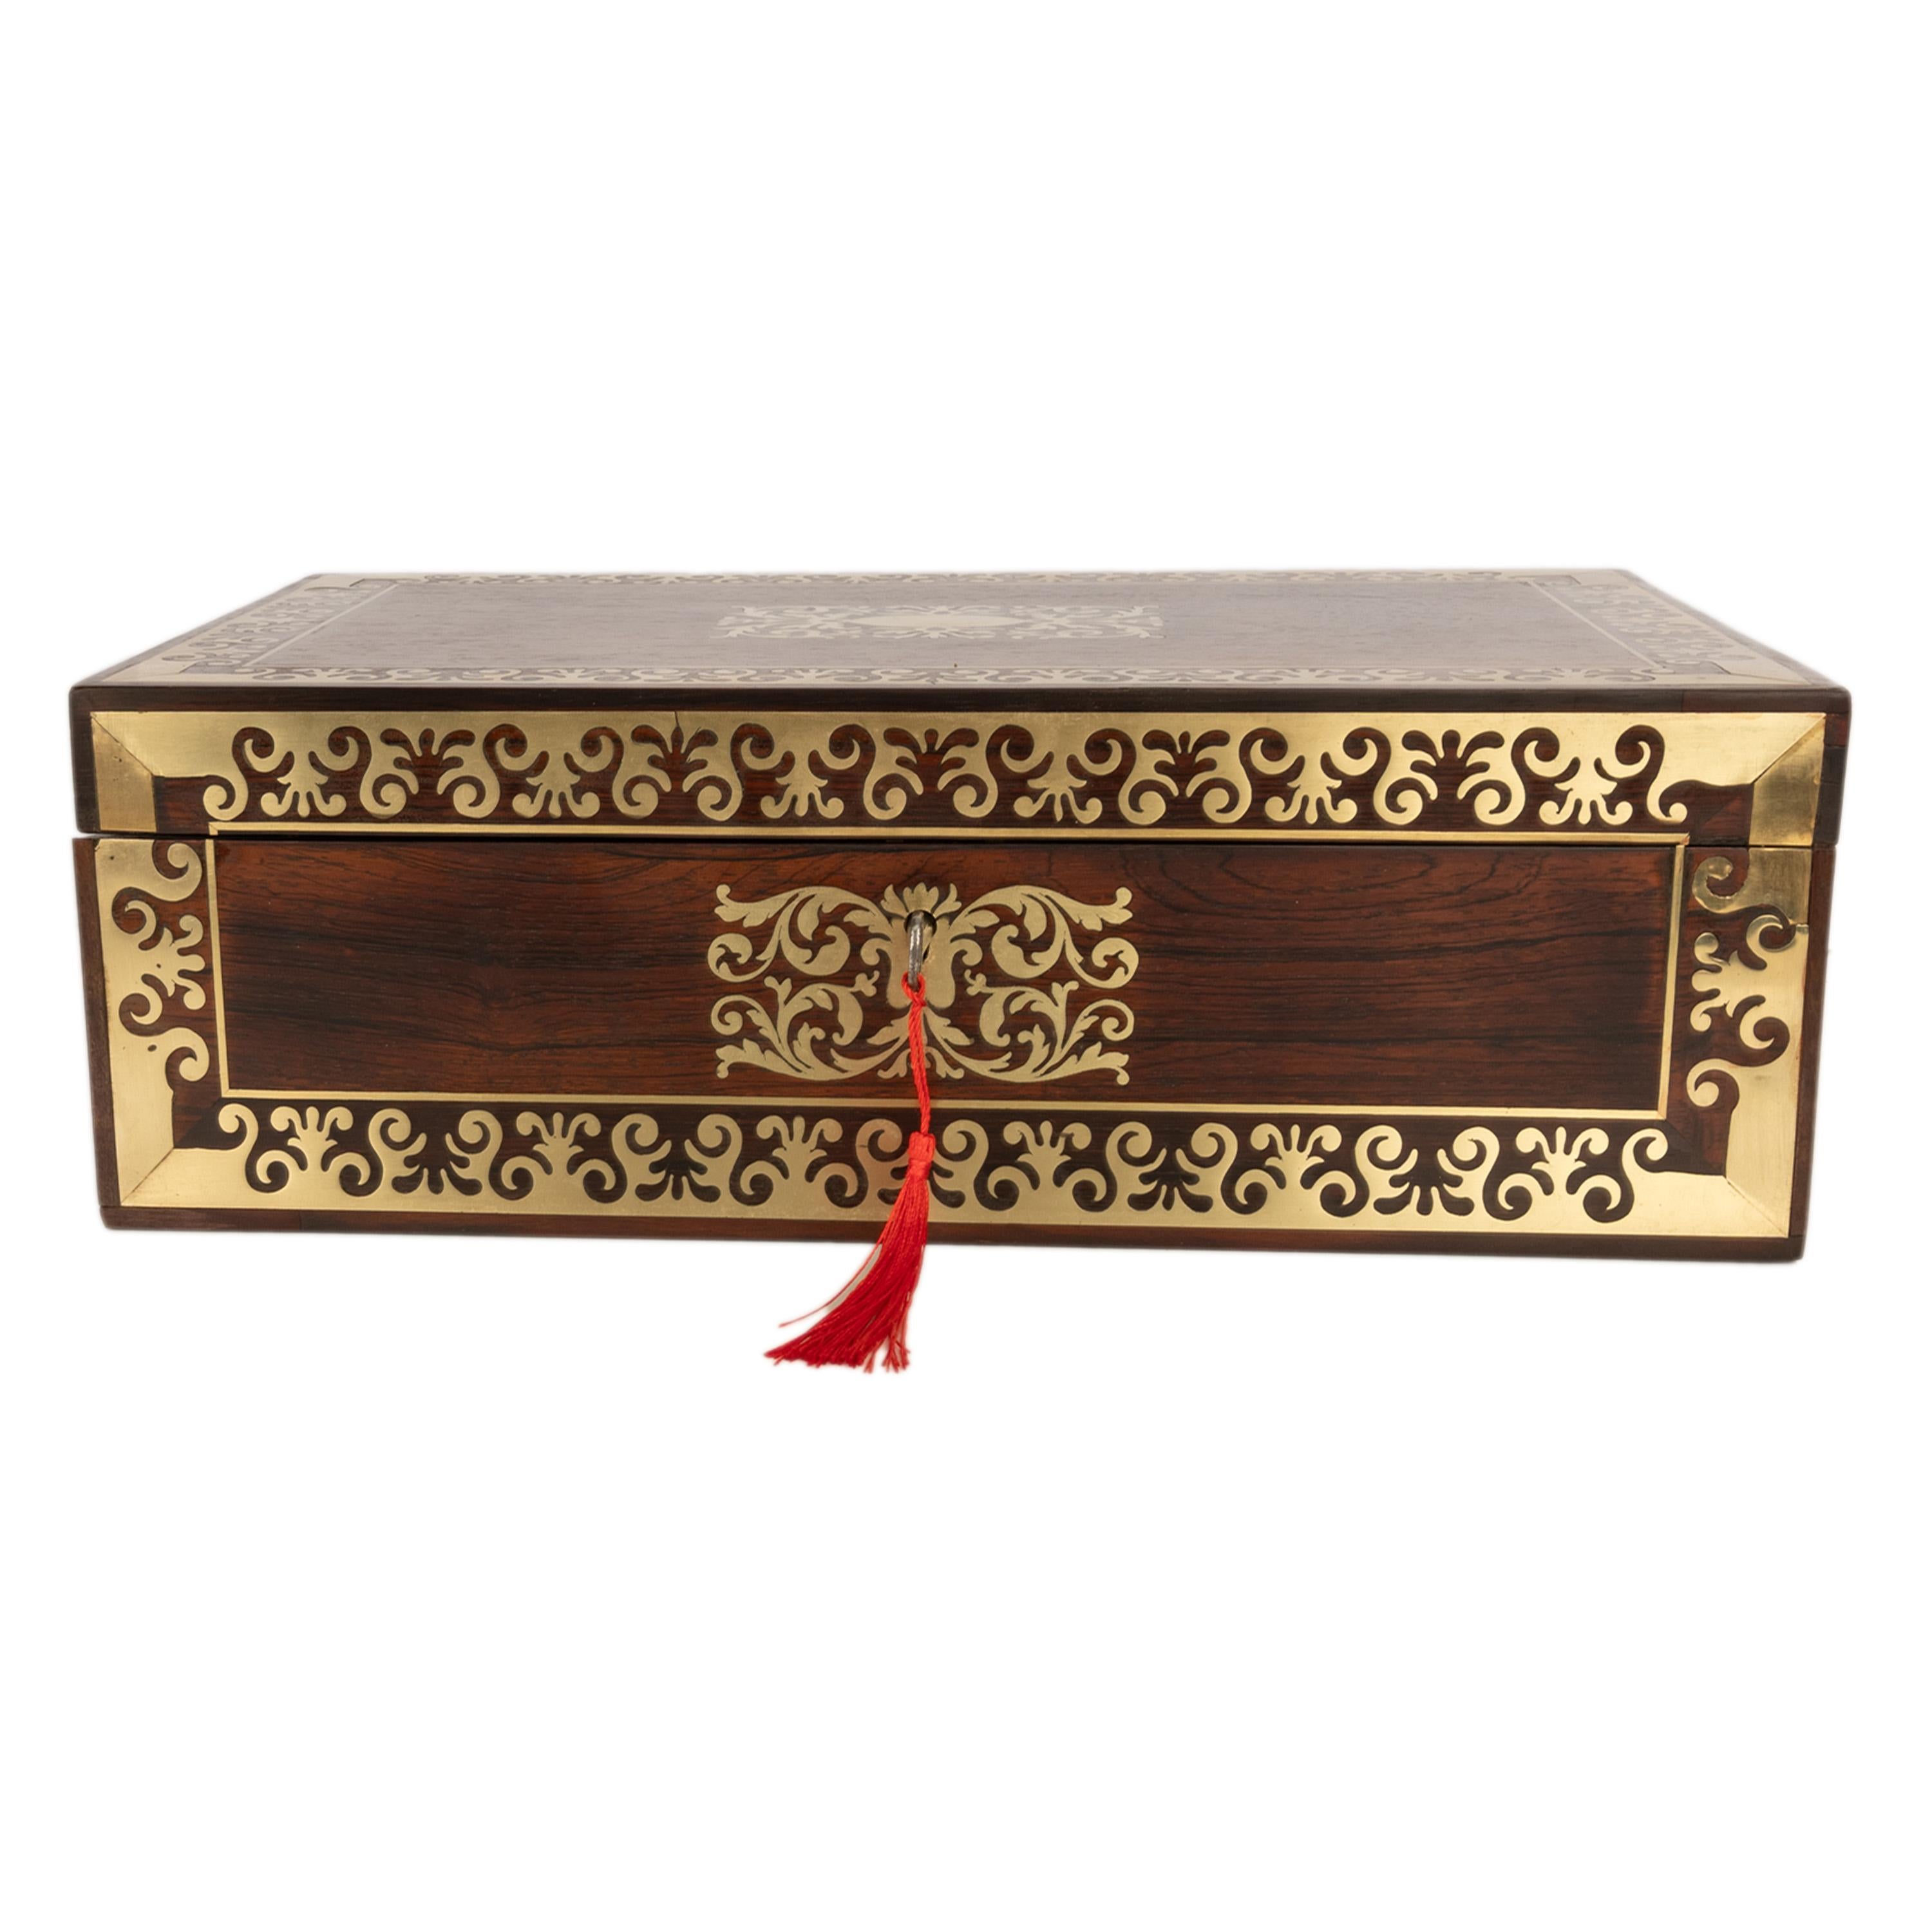 Gilt Fine Antique Regency Rosewood Inlaid Brass Campaign Writing Box Desk Slope 1830 For Sale